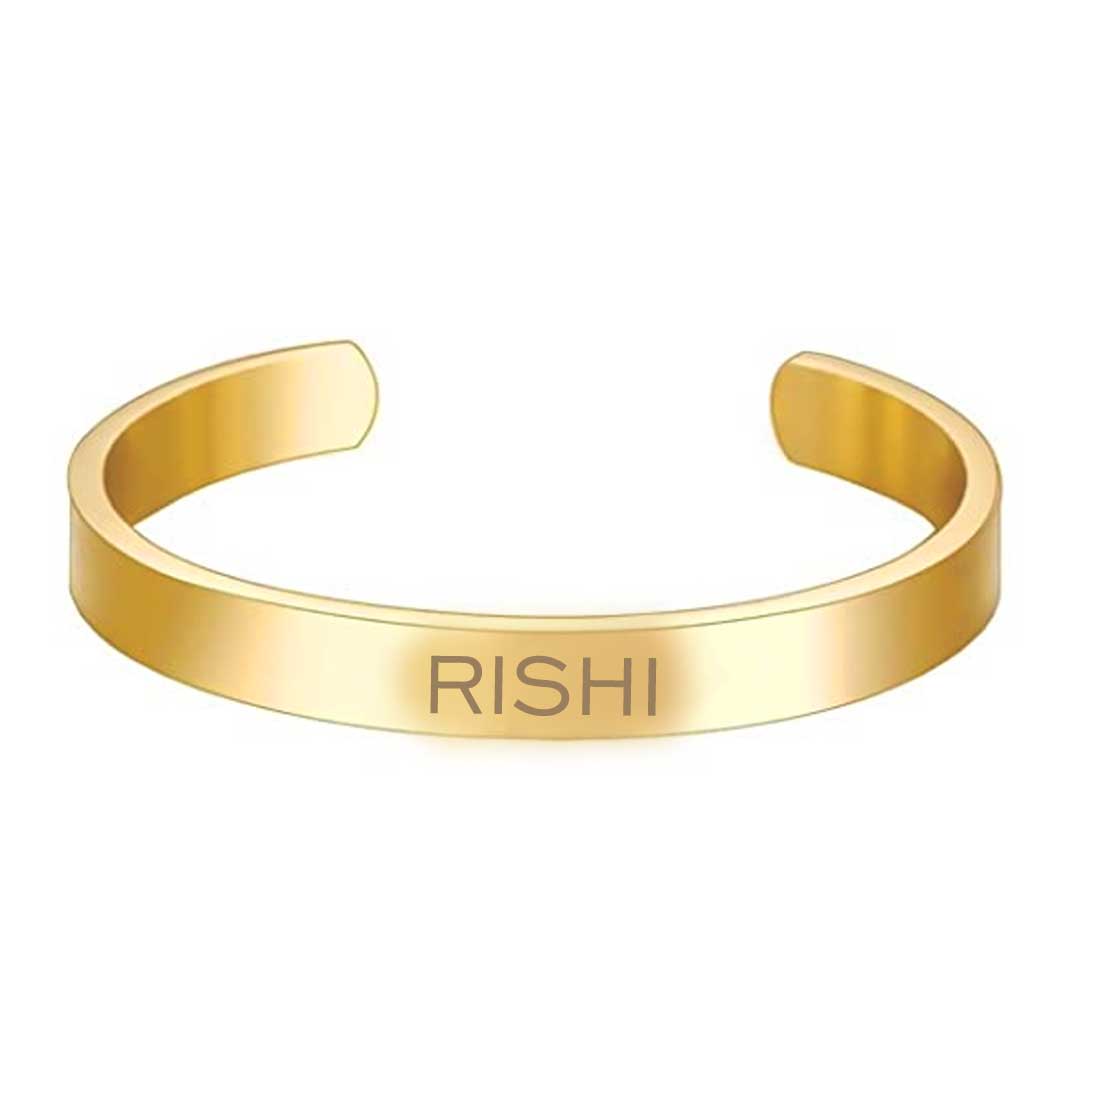 Buy Personalized Bracelet With Name for Men Women  Nutcase